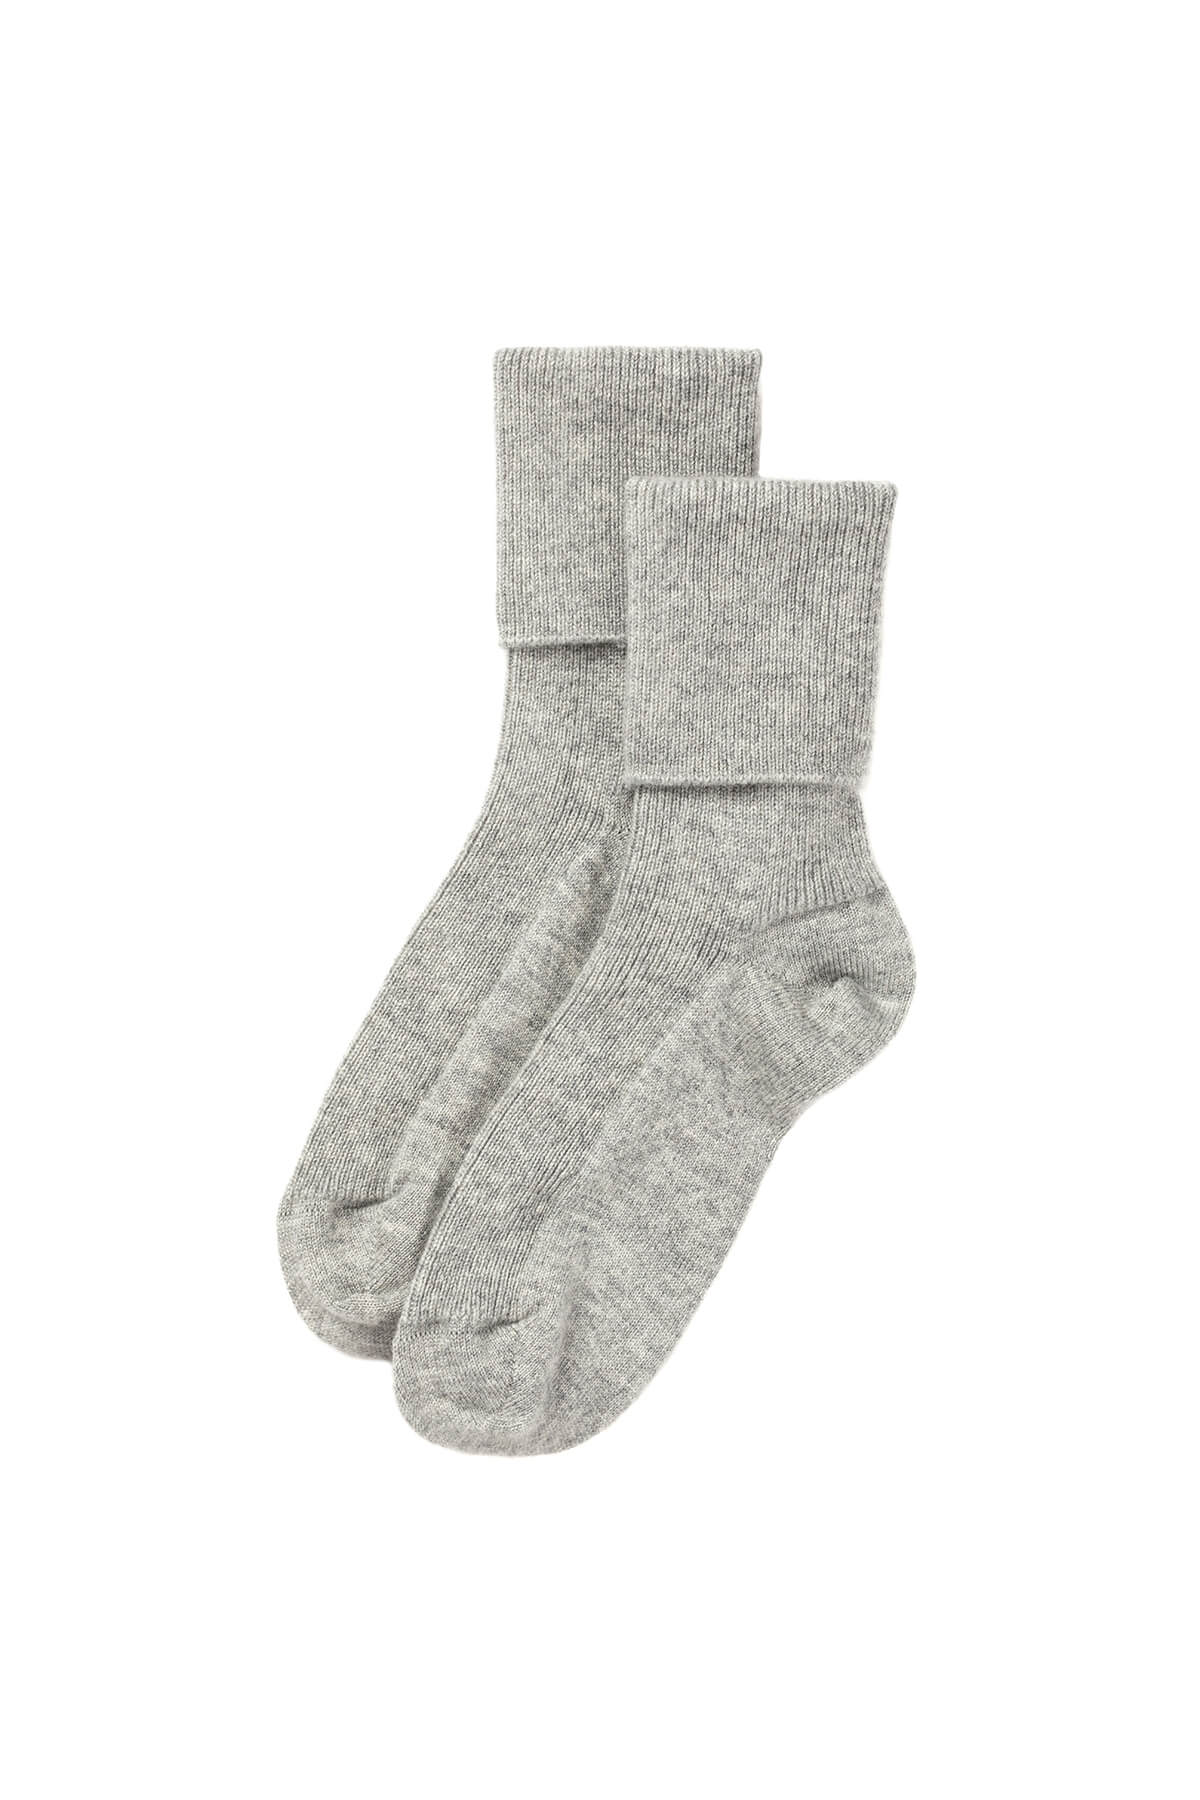 Johnstons of Elgin Gift Set includes 3 pairs of Women's Cashmere Socks in Silver on a white background 365GIFTSET1A